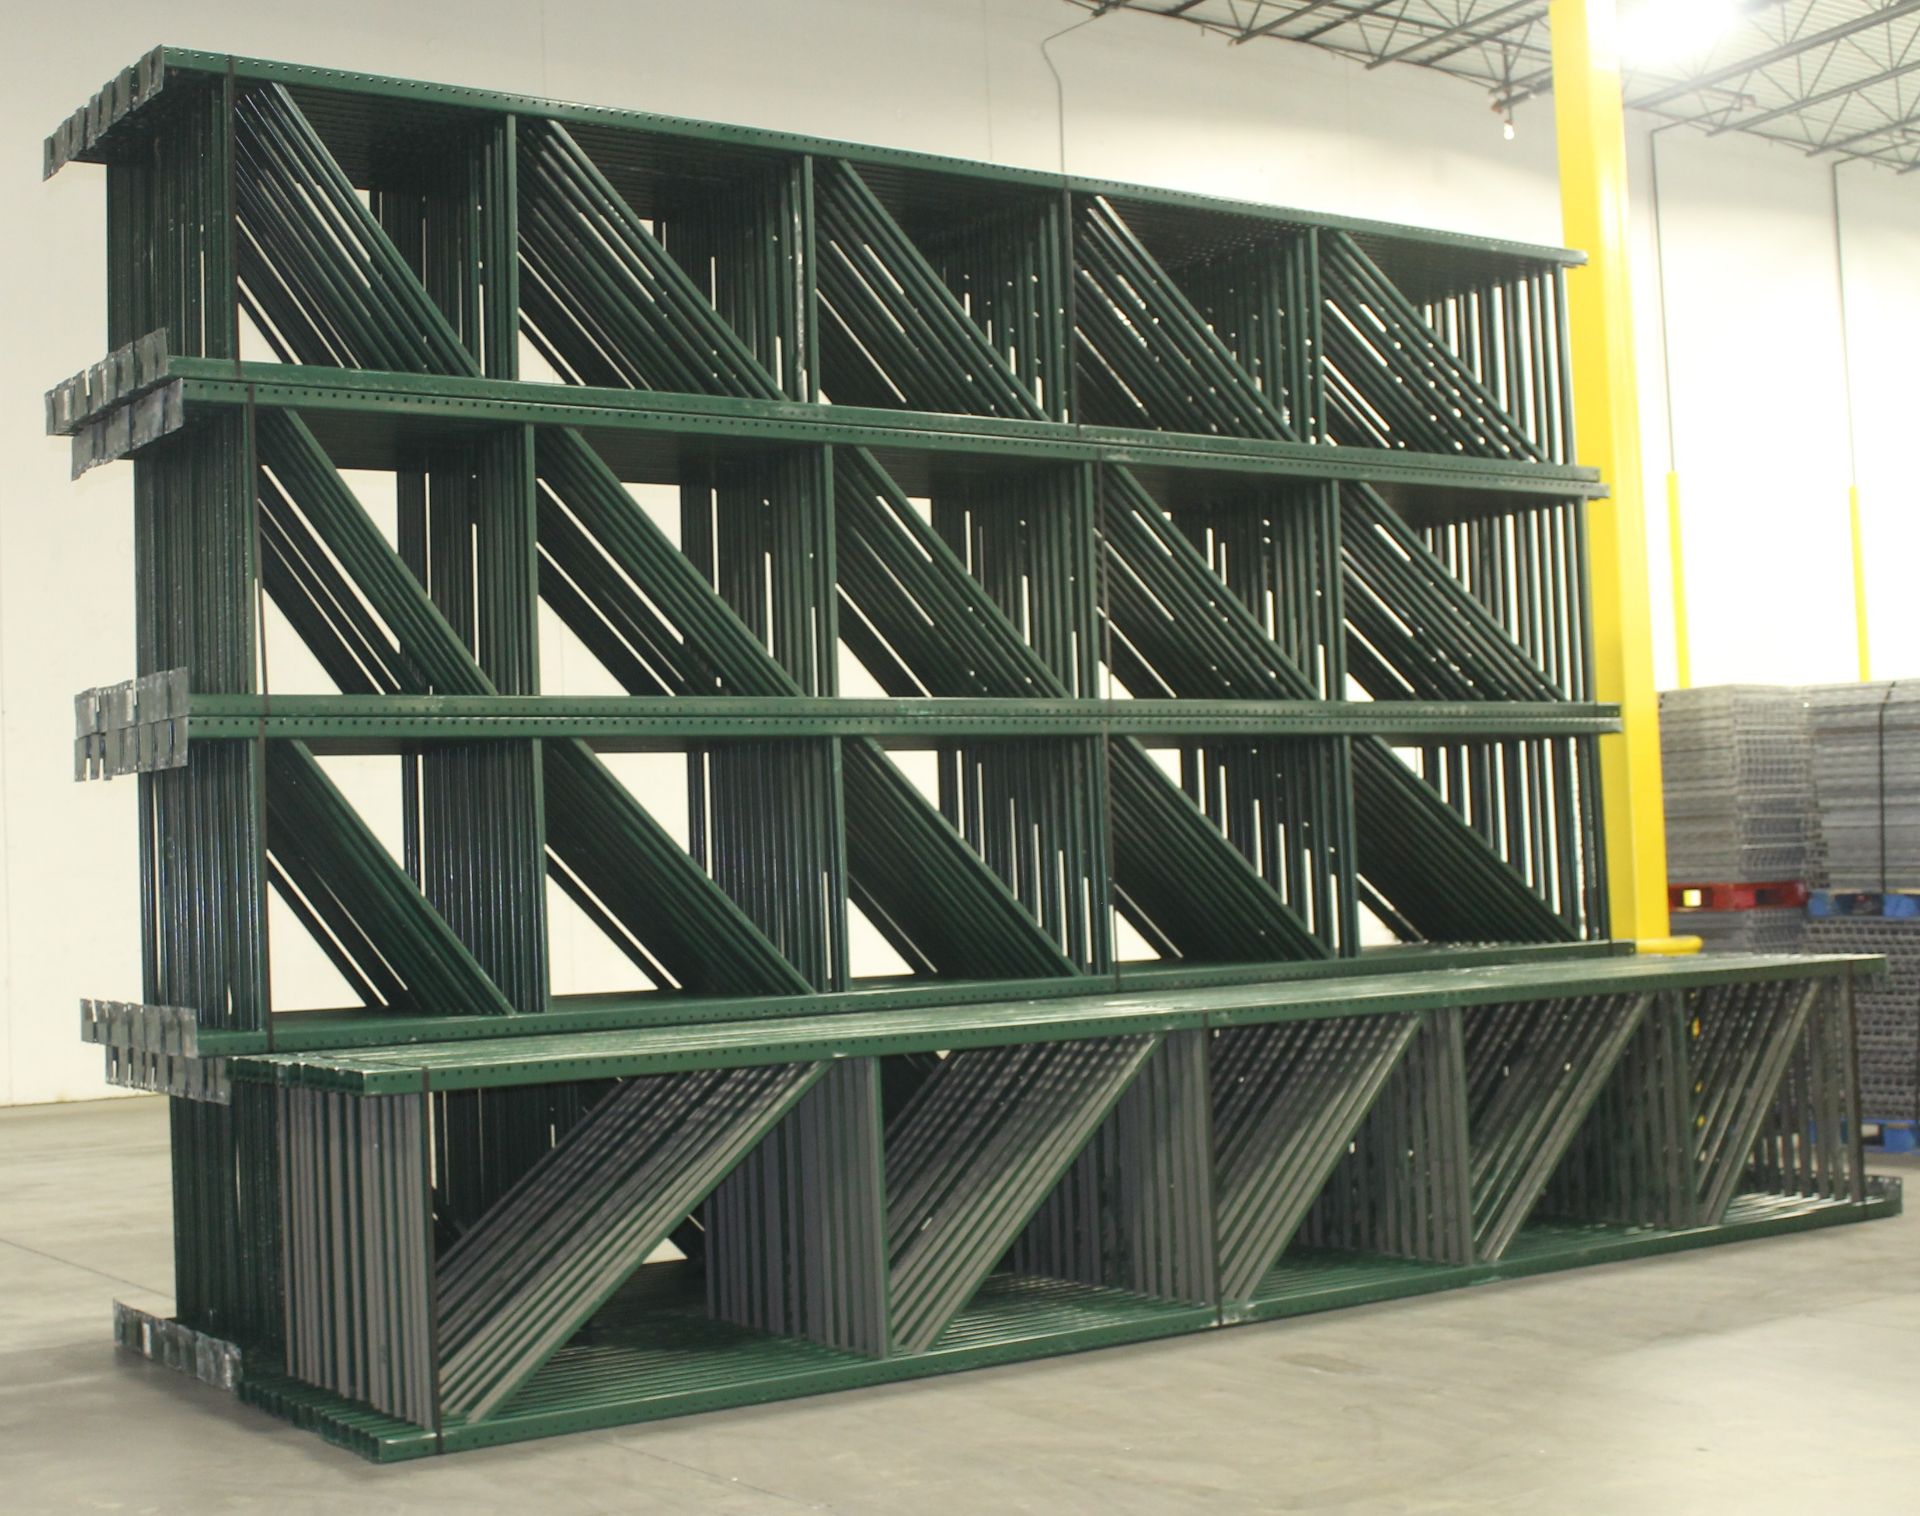 28 BAYS OF 26'H x 42"D X 120"W TEARDROP STYLE PALLET RACK, (BACK TO BACK) (4 BEAM LEVEL)